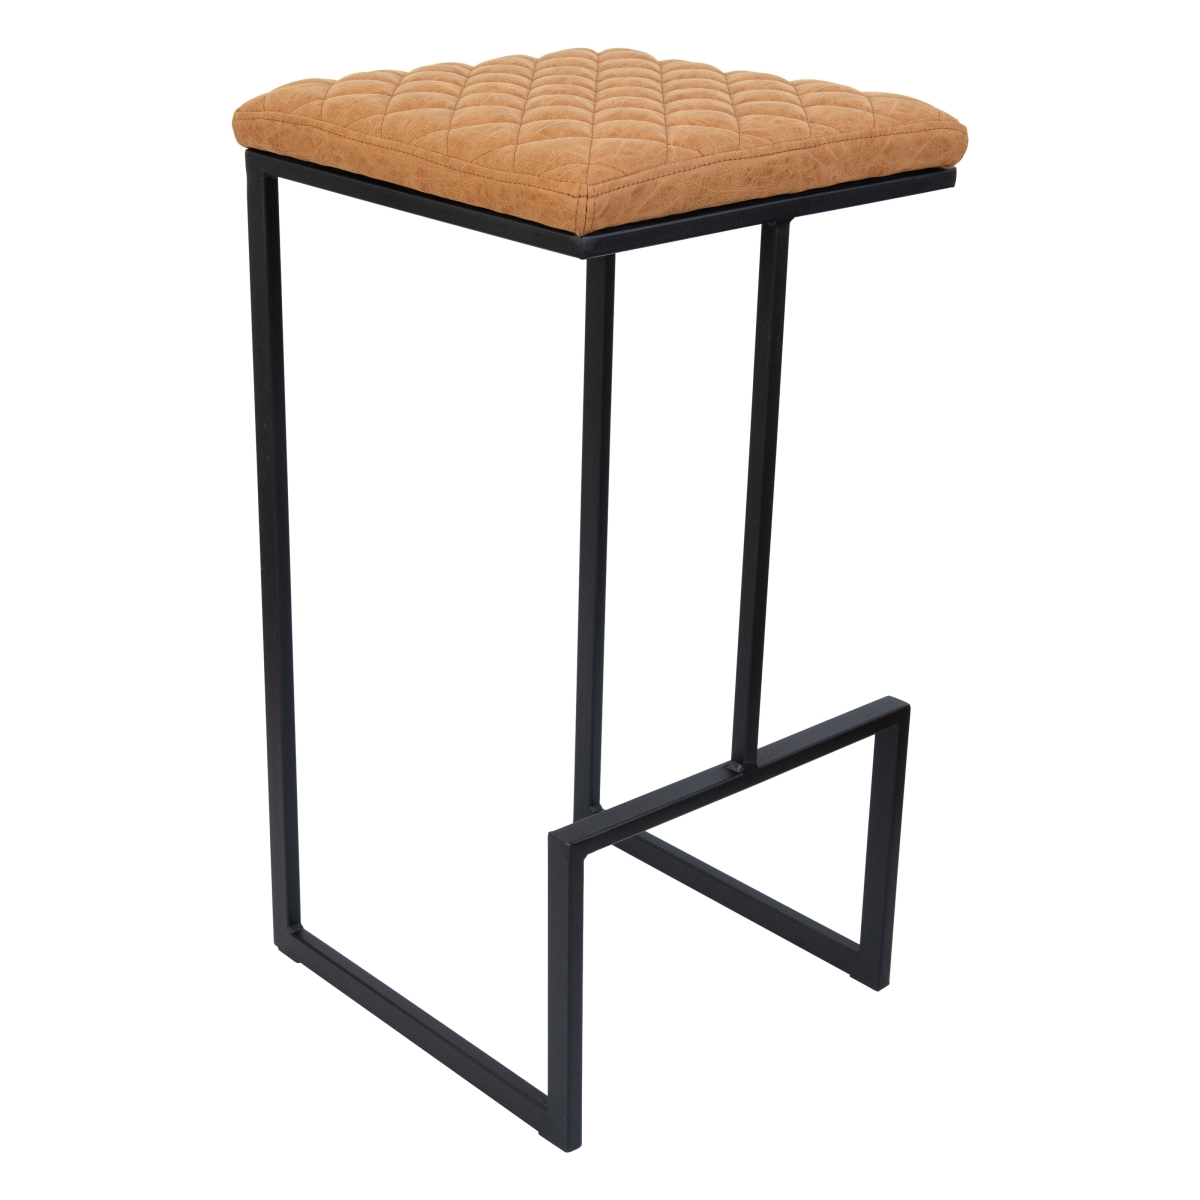 Picture of LeisureMod QS29BR 29 x 15 x 15 in. Quincy Quilted Stitched Leather Bar Stools with Metal Frame, Light Brown